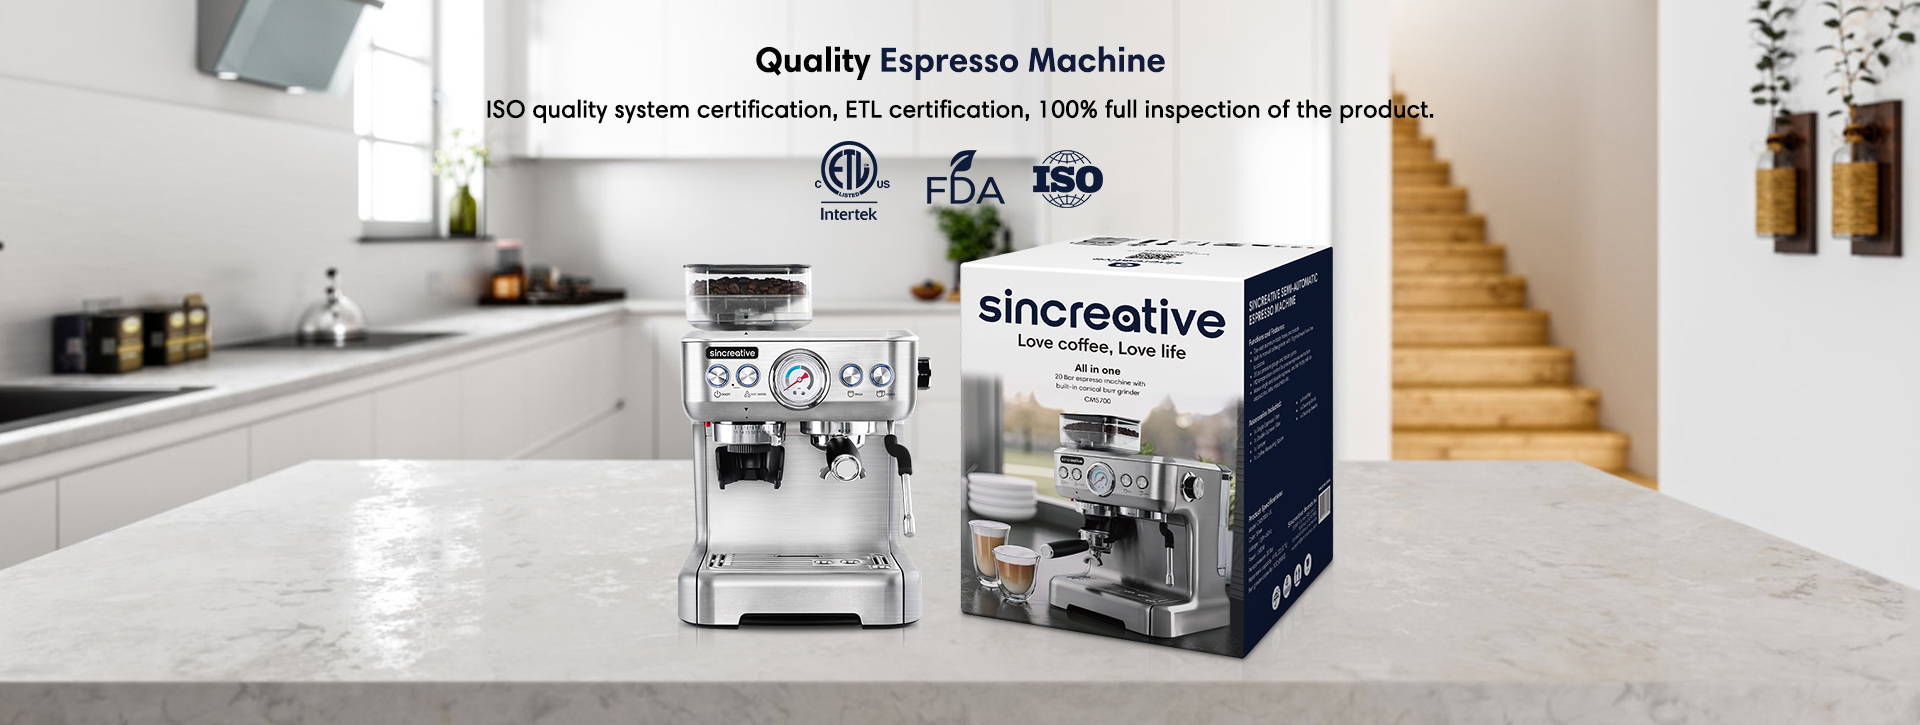 quality espresso machine for home use at a affordable price